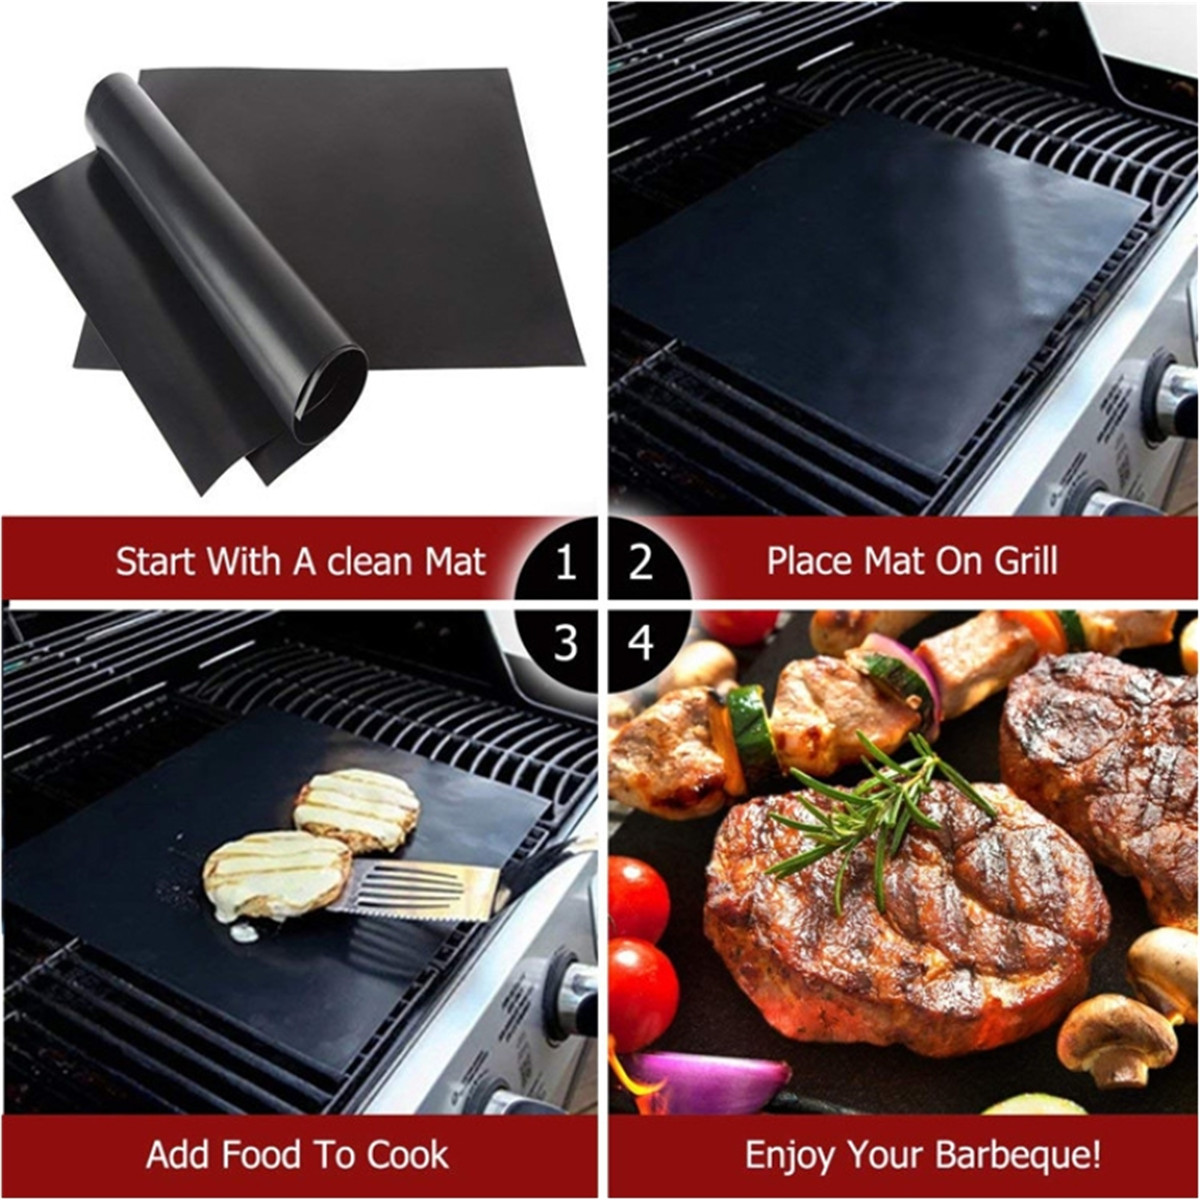 5pcs-BBQ-Grill-Mat-Barbecue-Outdoor-Baking-Non-stick-Pad-Reusable-And-Easy-To-Clean-Cooking-Mat-1698957-2